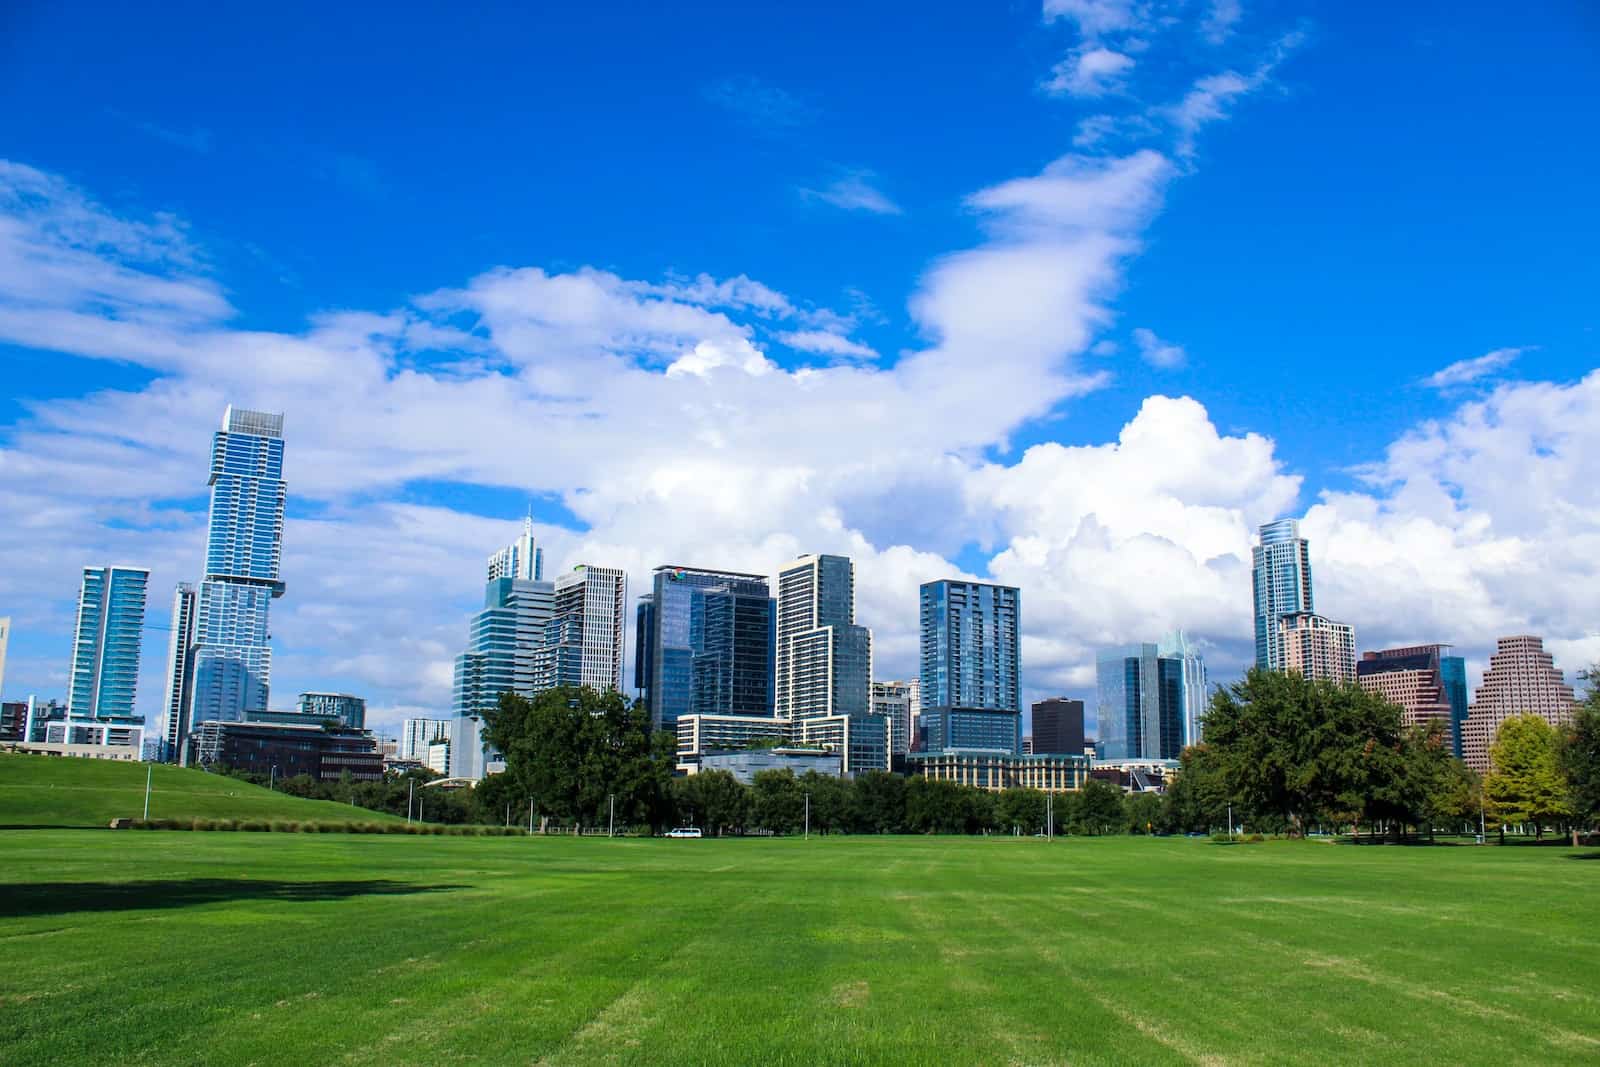 a grassy field in front of a city skyline